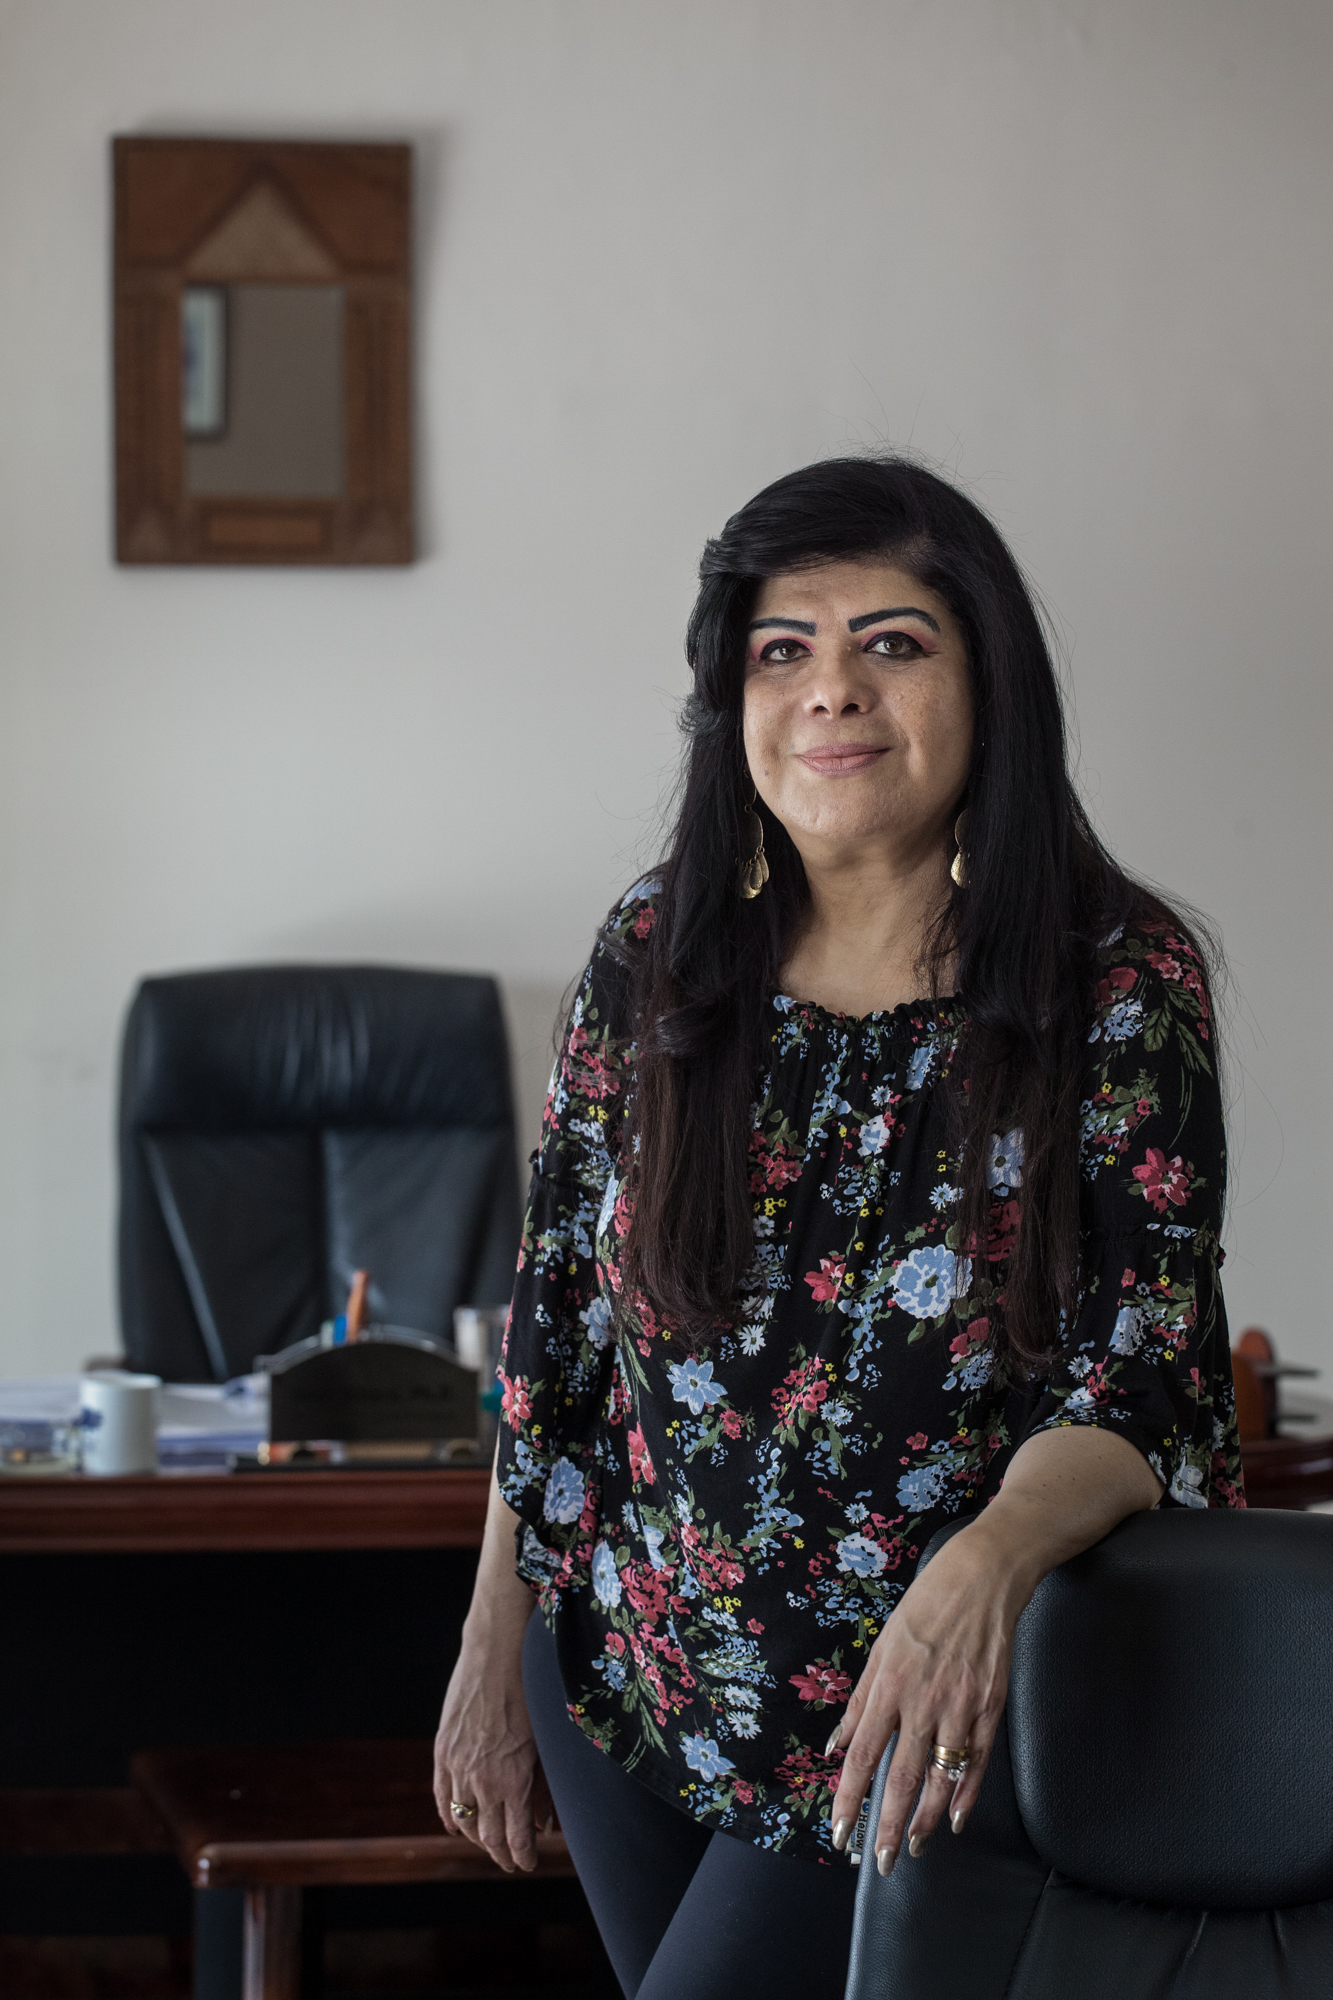 Portrait Iman Bibars, 58 years old, is regional director of the association Ashoka Arab World for society development and director of the association ADEW. „We are feminist and secure! The issue of unmarried women in very complex. Educated women get less